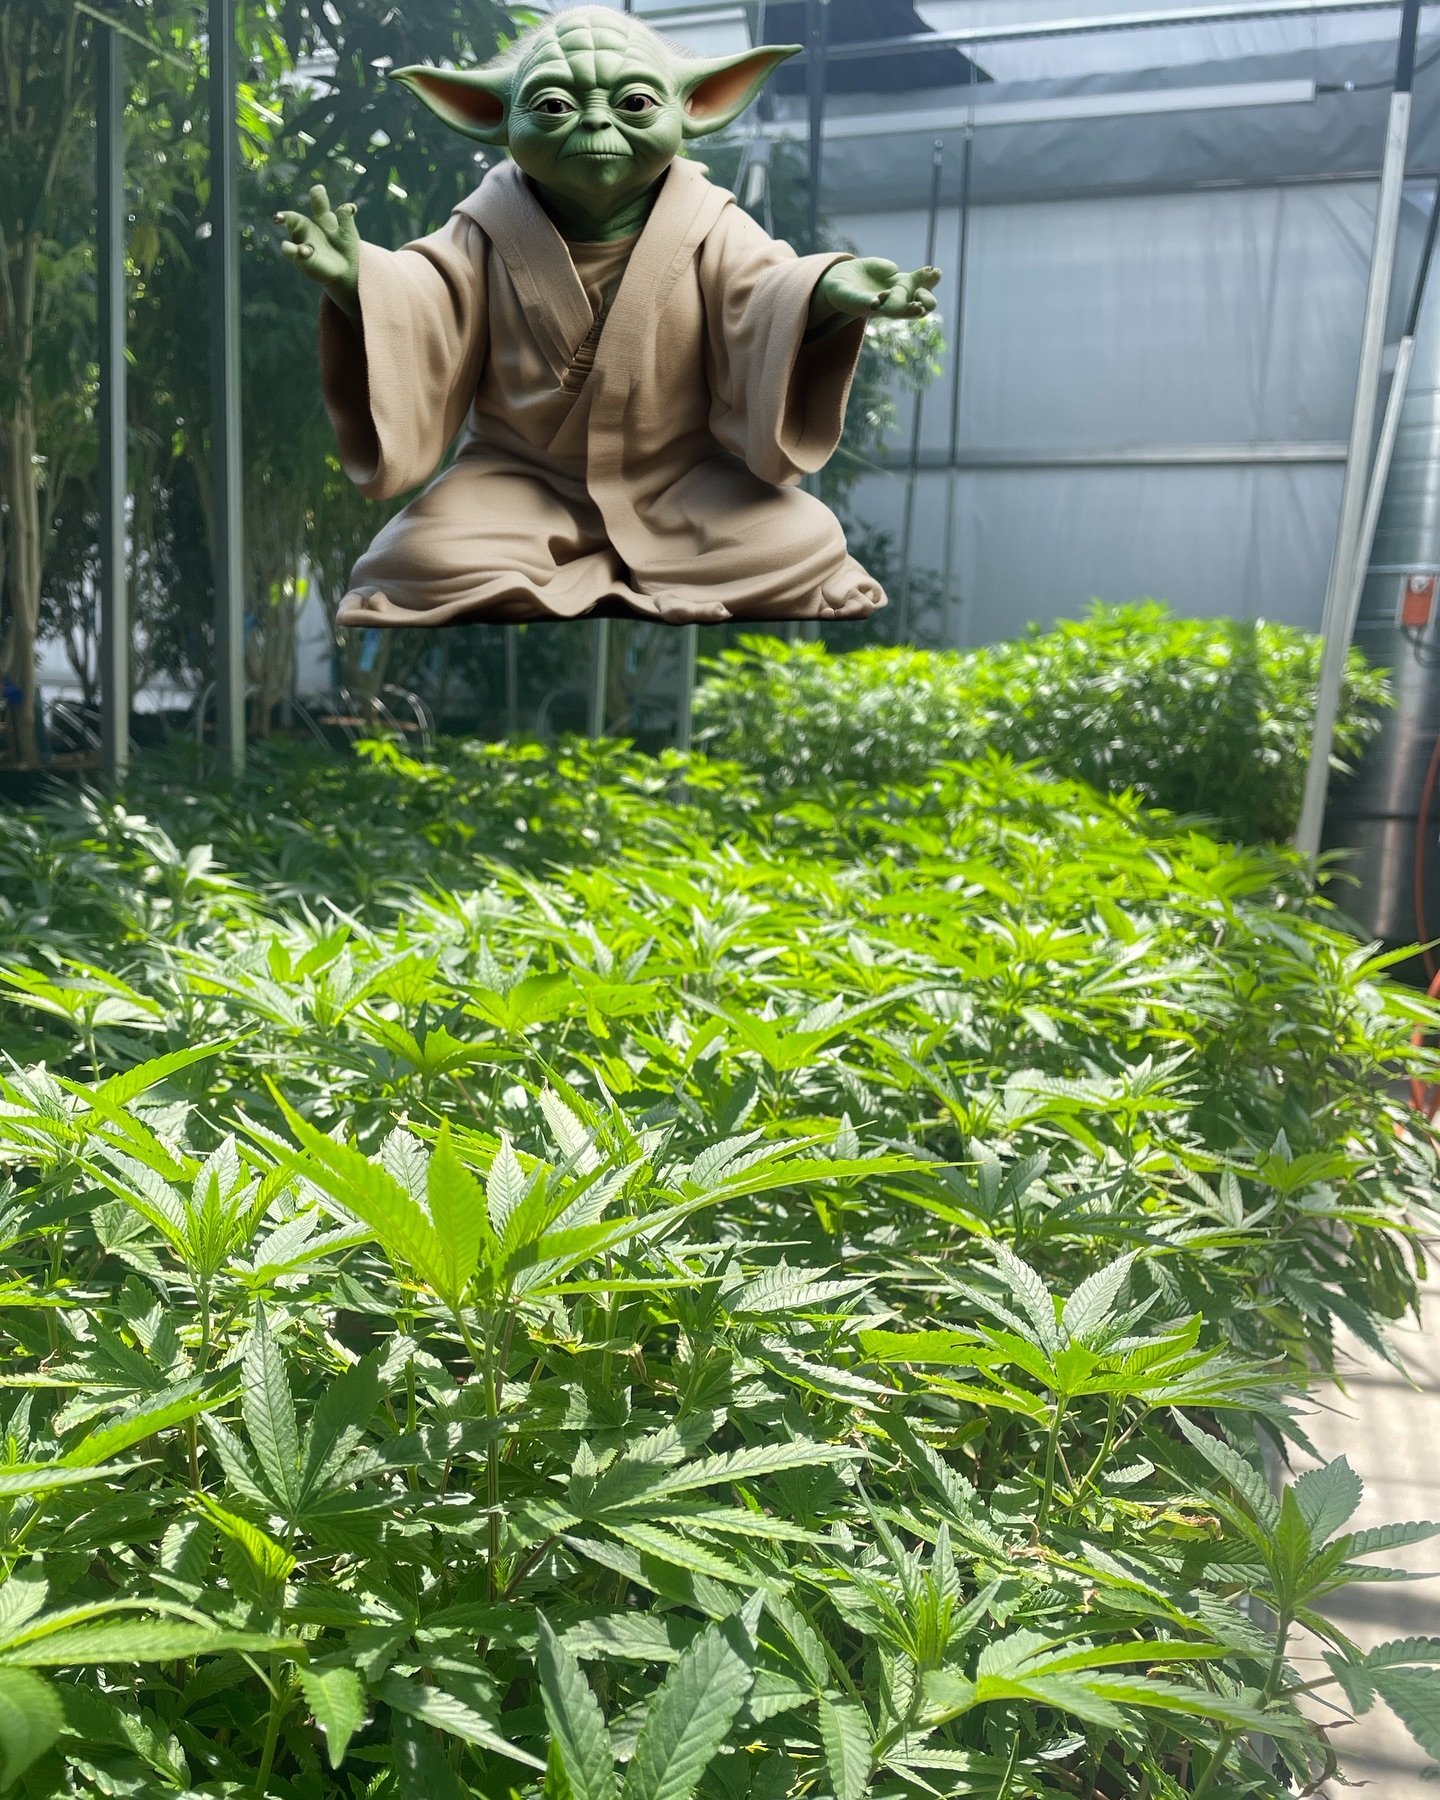 Unleashed, the clone army has been. May the 4th be with you.

#myndset  #cultivatingconsciousness #420 #sustainability#puremichigan  #craftcannabis #cannabis #tasty
#starwars #maythe4thbewithyou